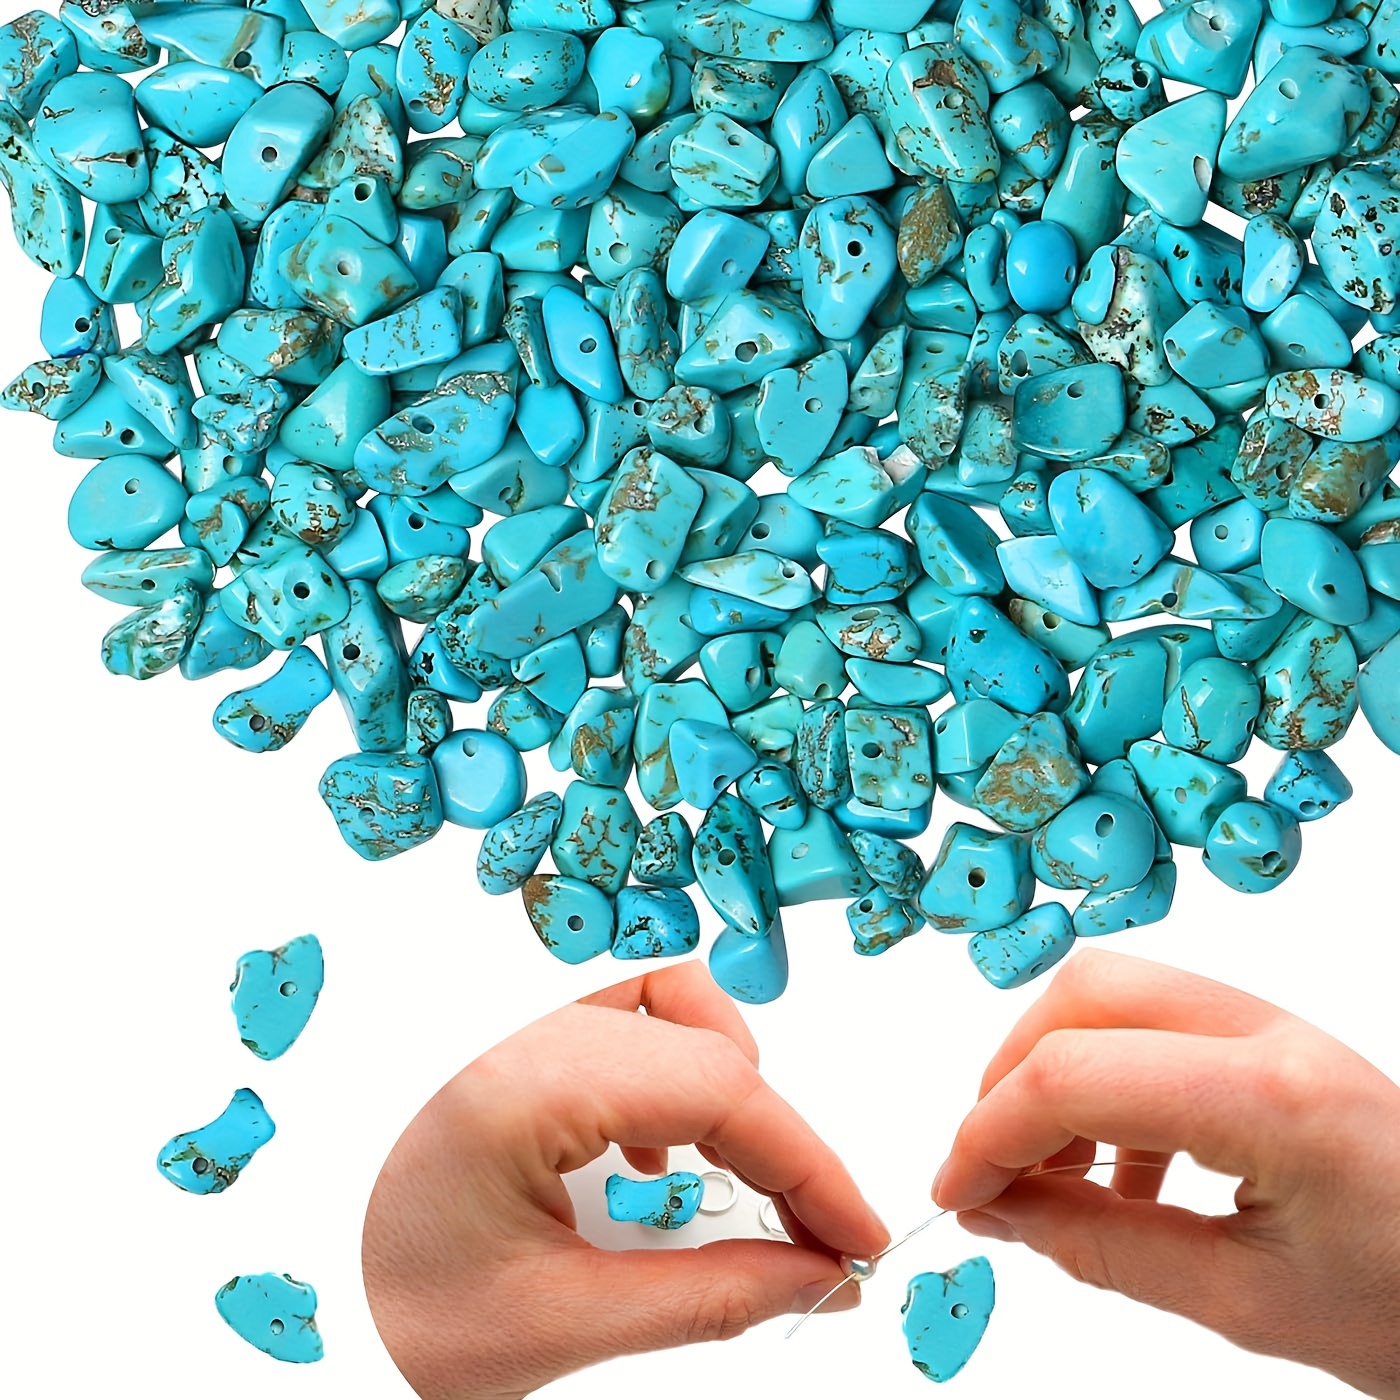 

400pcs 5-8mm Blue Turquoise Natural Chip Stone Crystal Irregular Loose Rocks Beads For Jewelry Making Diy Special Bracelet Earrings Necklace Beaded Craft Supplies